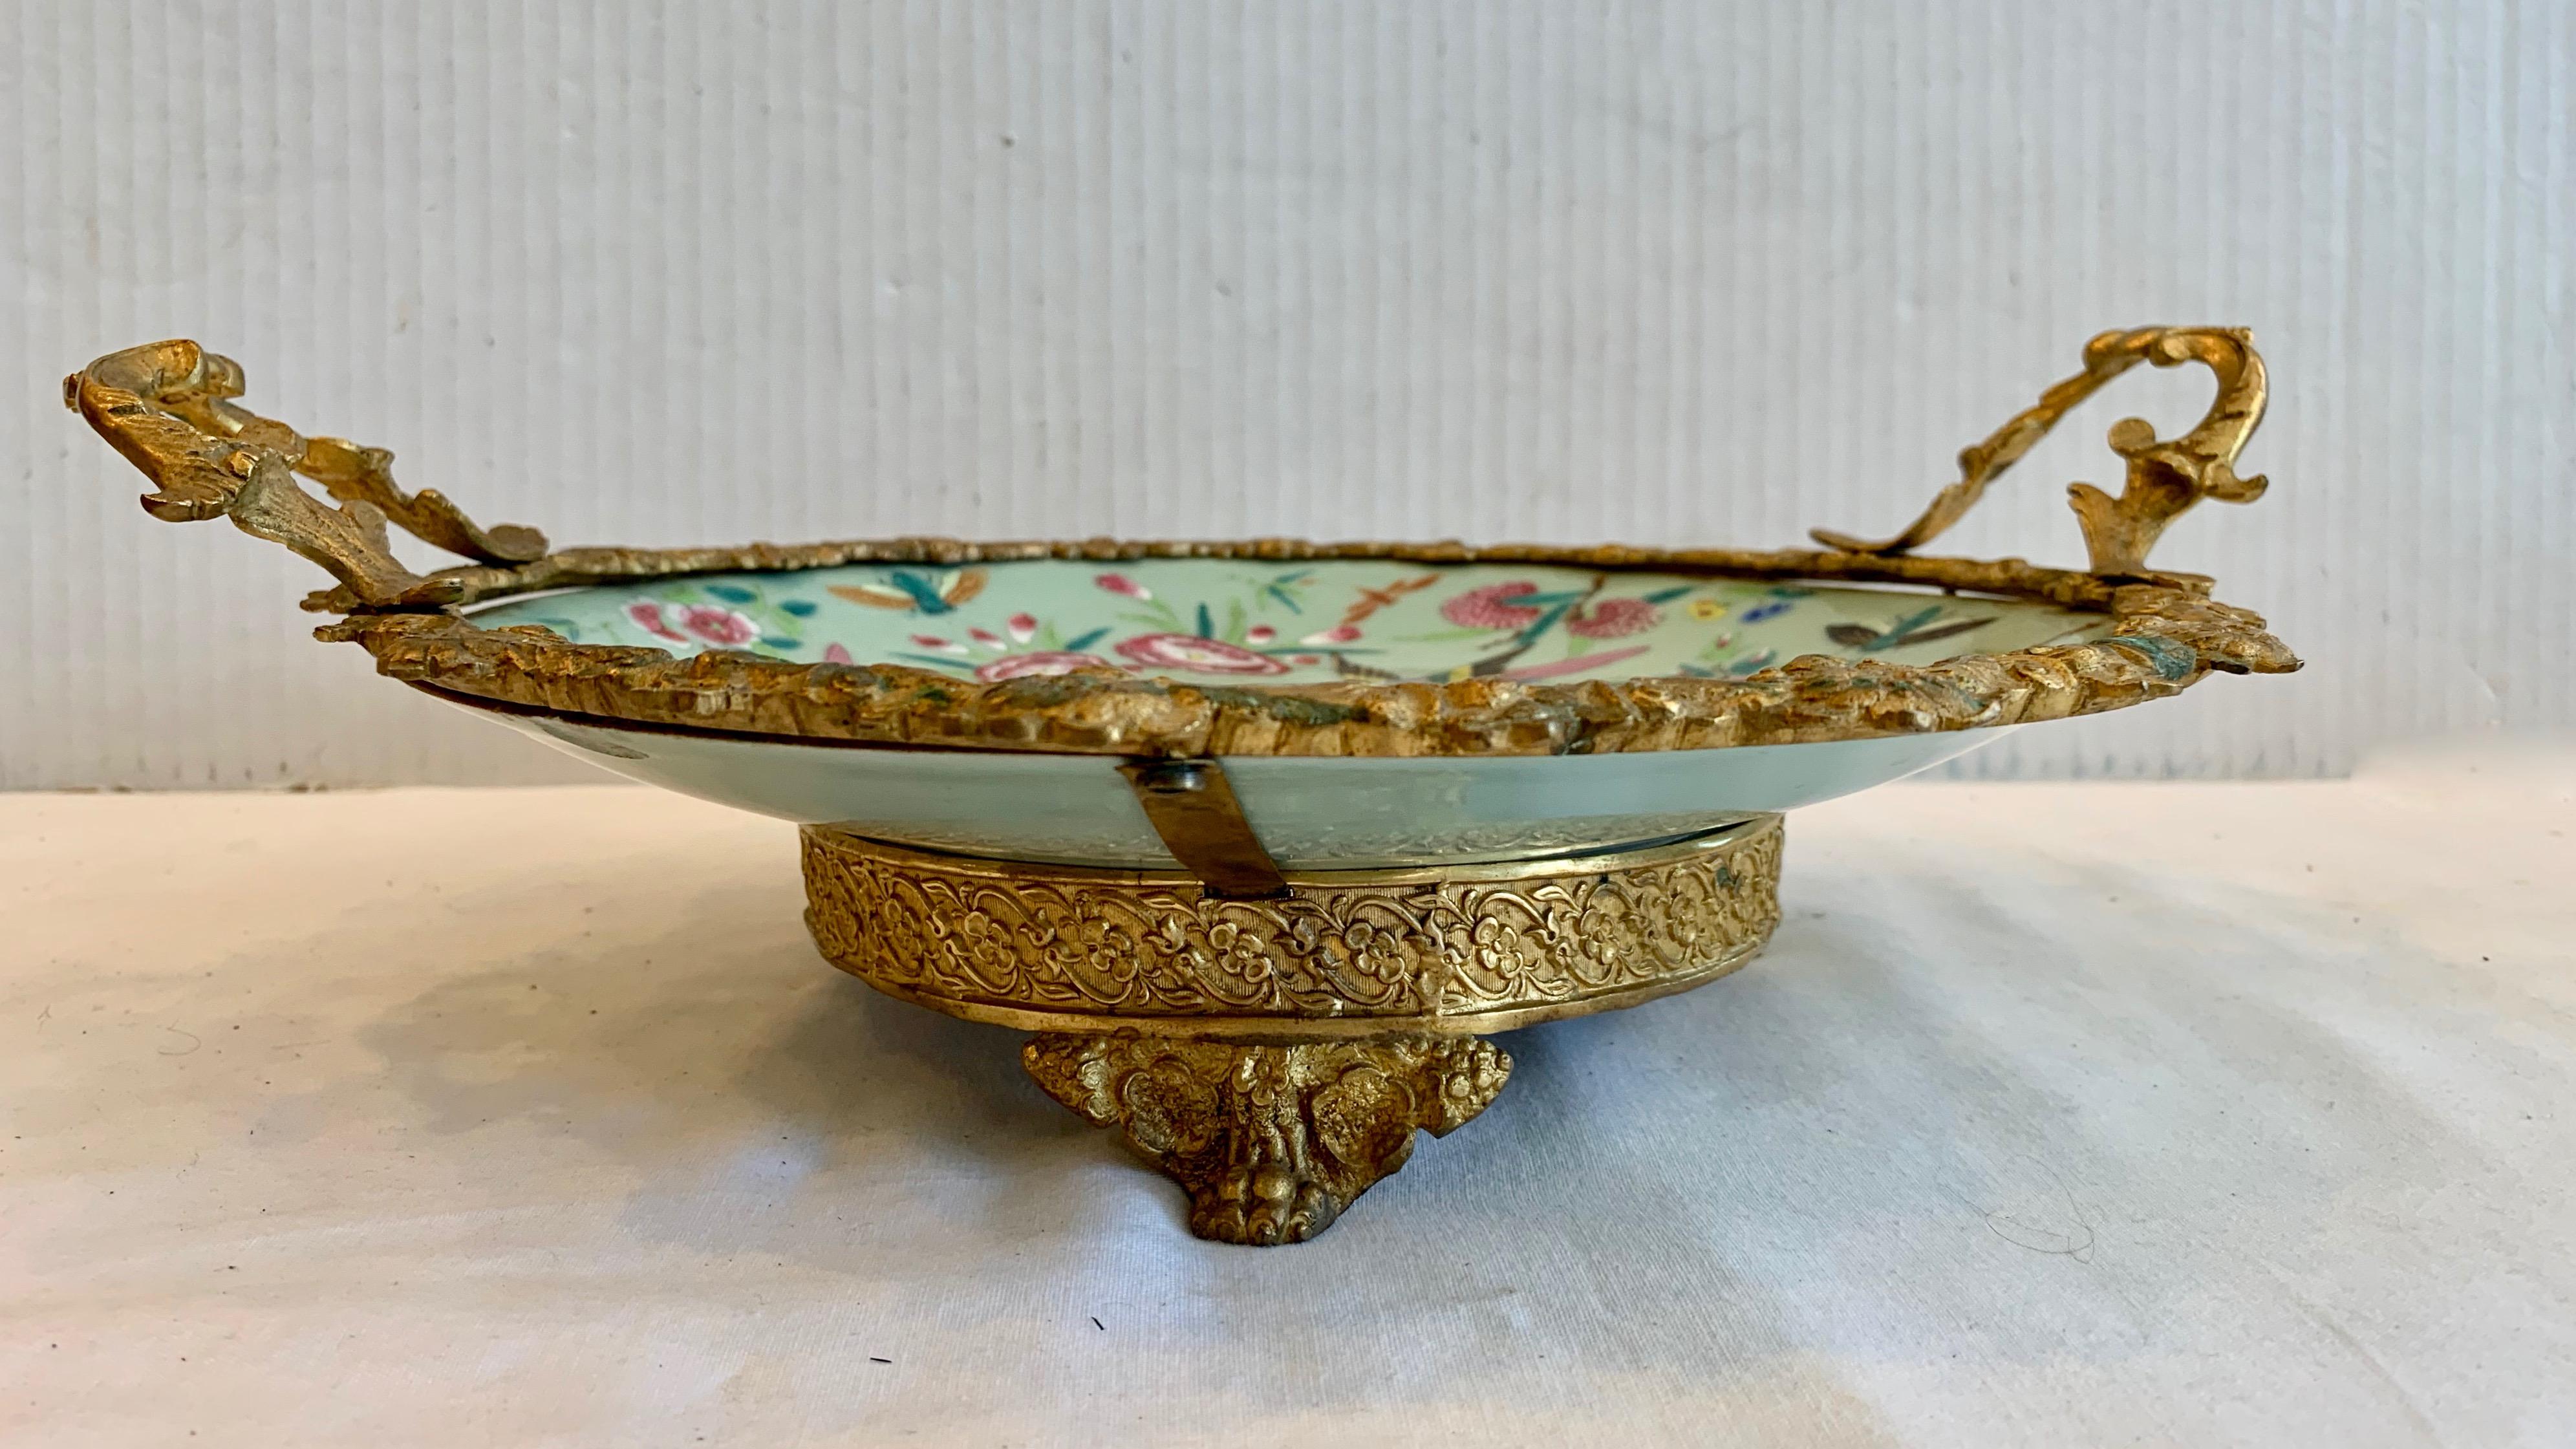 Superb quality and details. Beautiful celadon green color - profusely 
painted with birds and butterflies. Mounted with elaborate dore' bronze
framework and handles